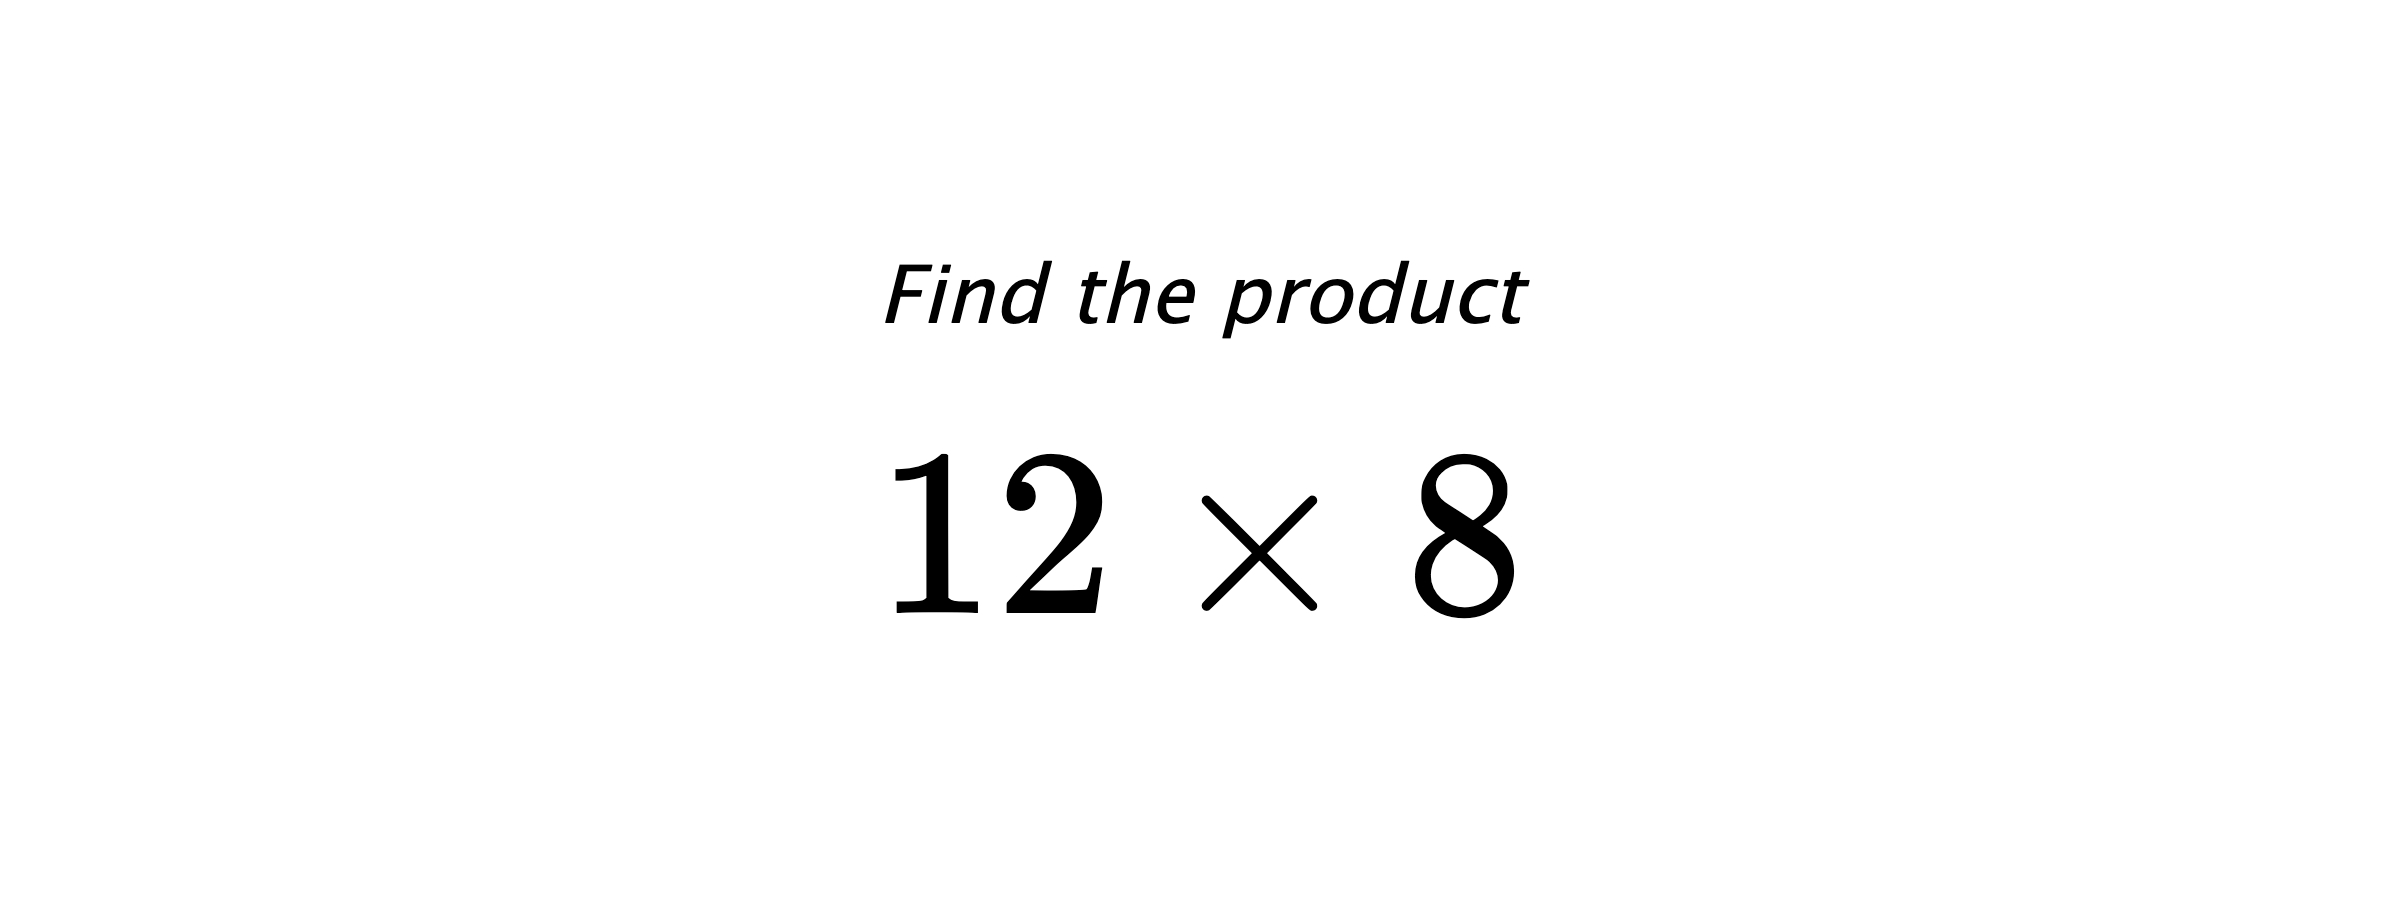 Find the product $ 12 \times 8 $